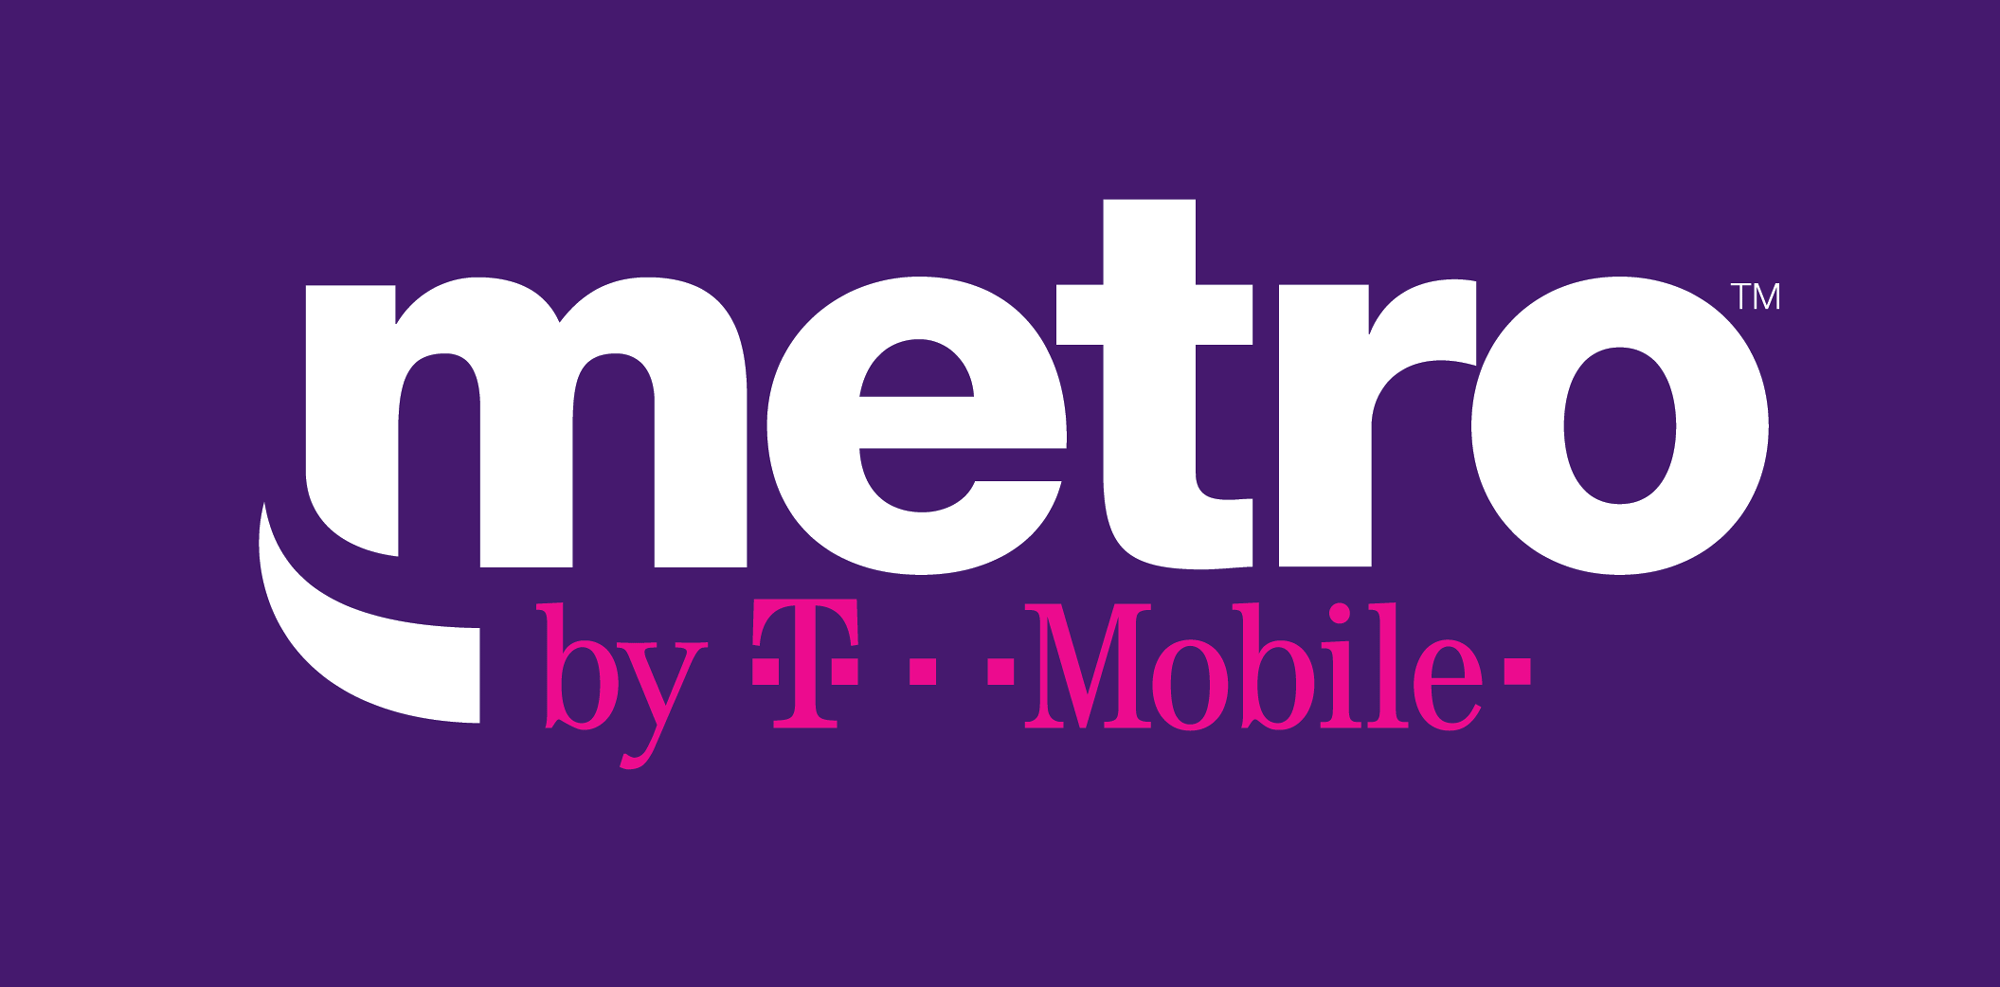 New T-Mobile Logo - Brand New: New Name and Logo for Metro by T-Mobile